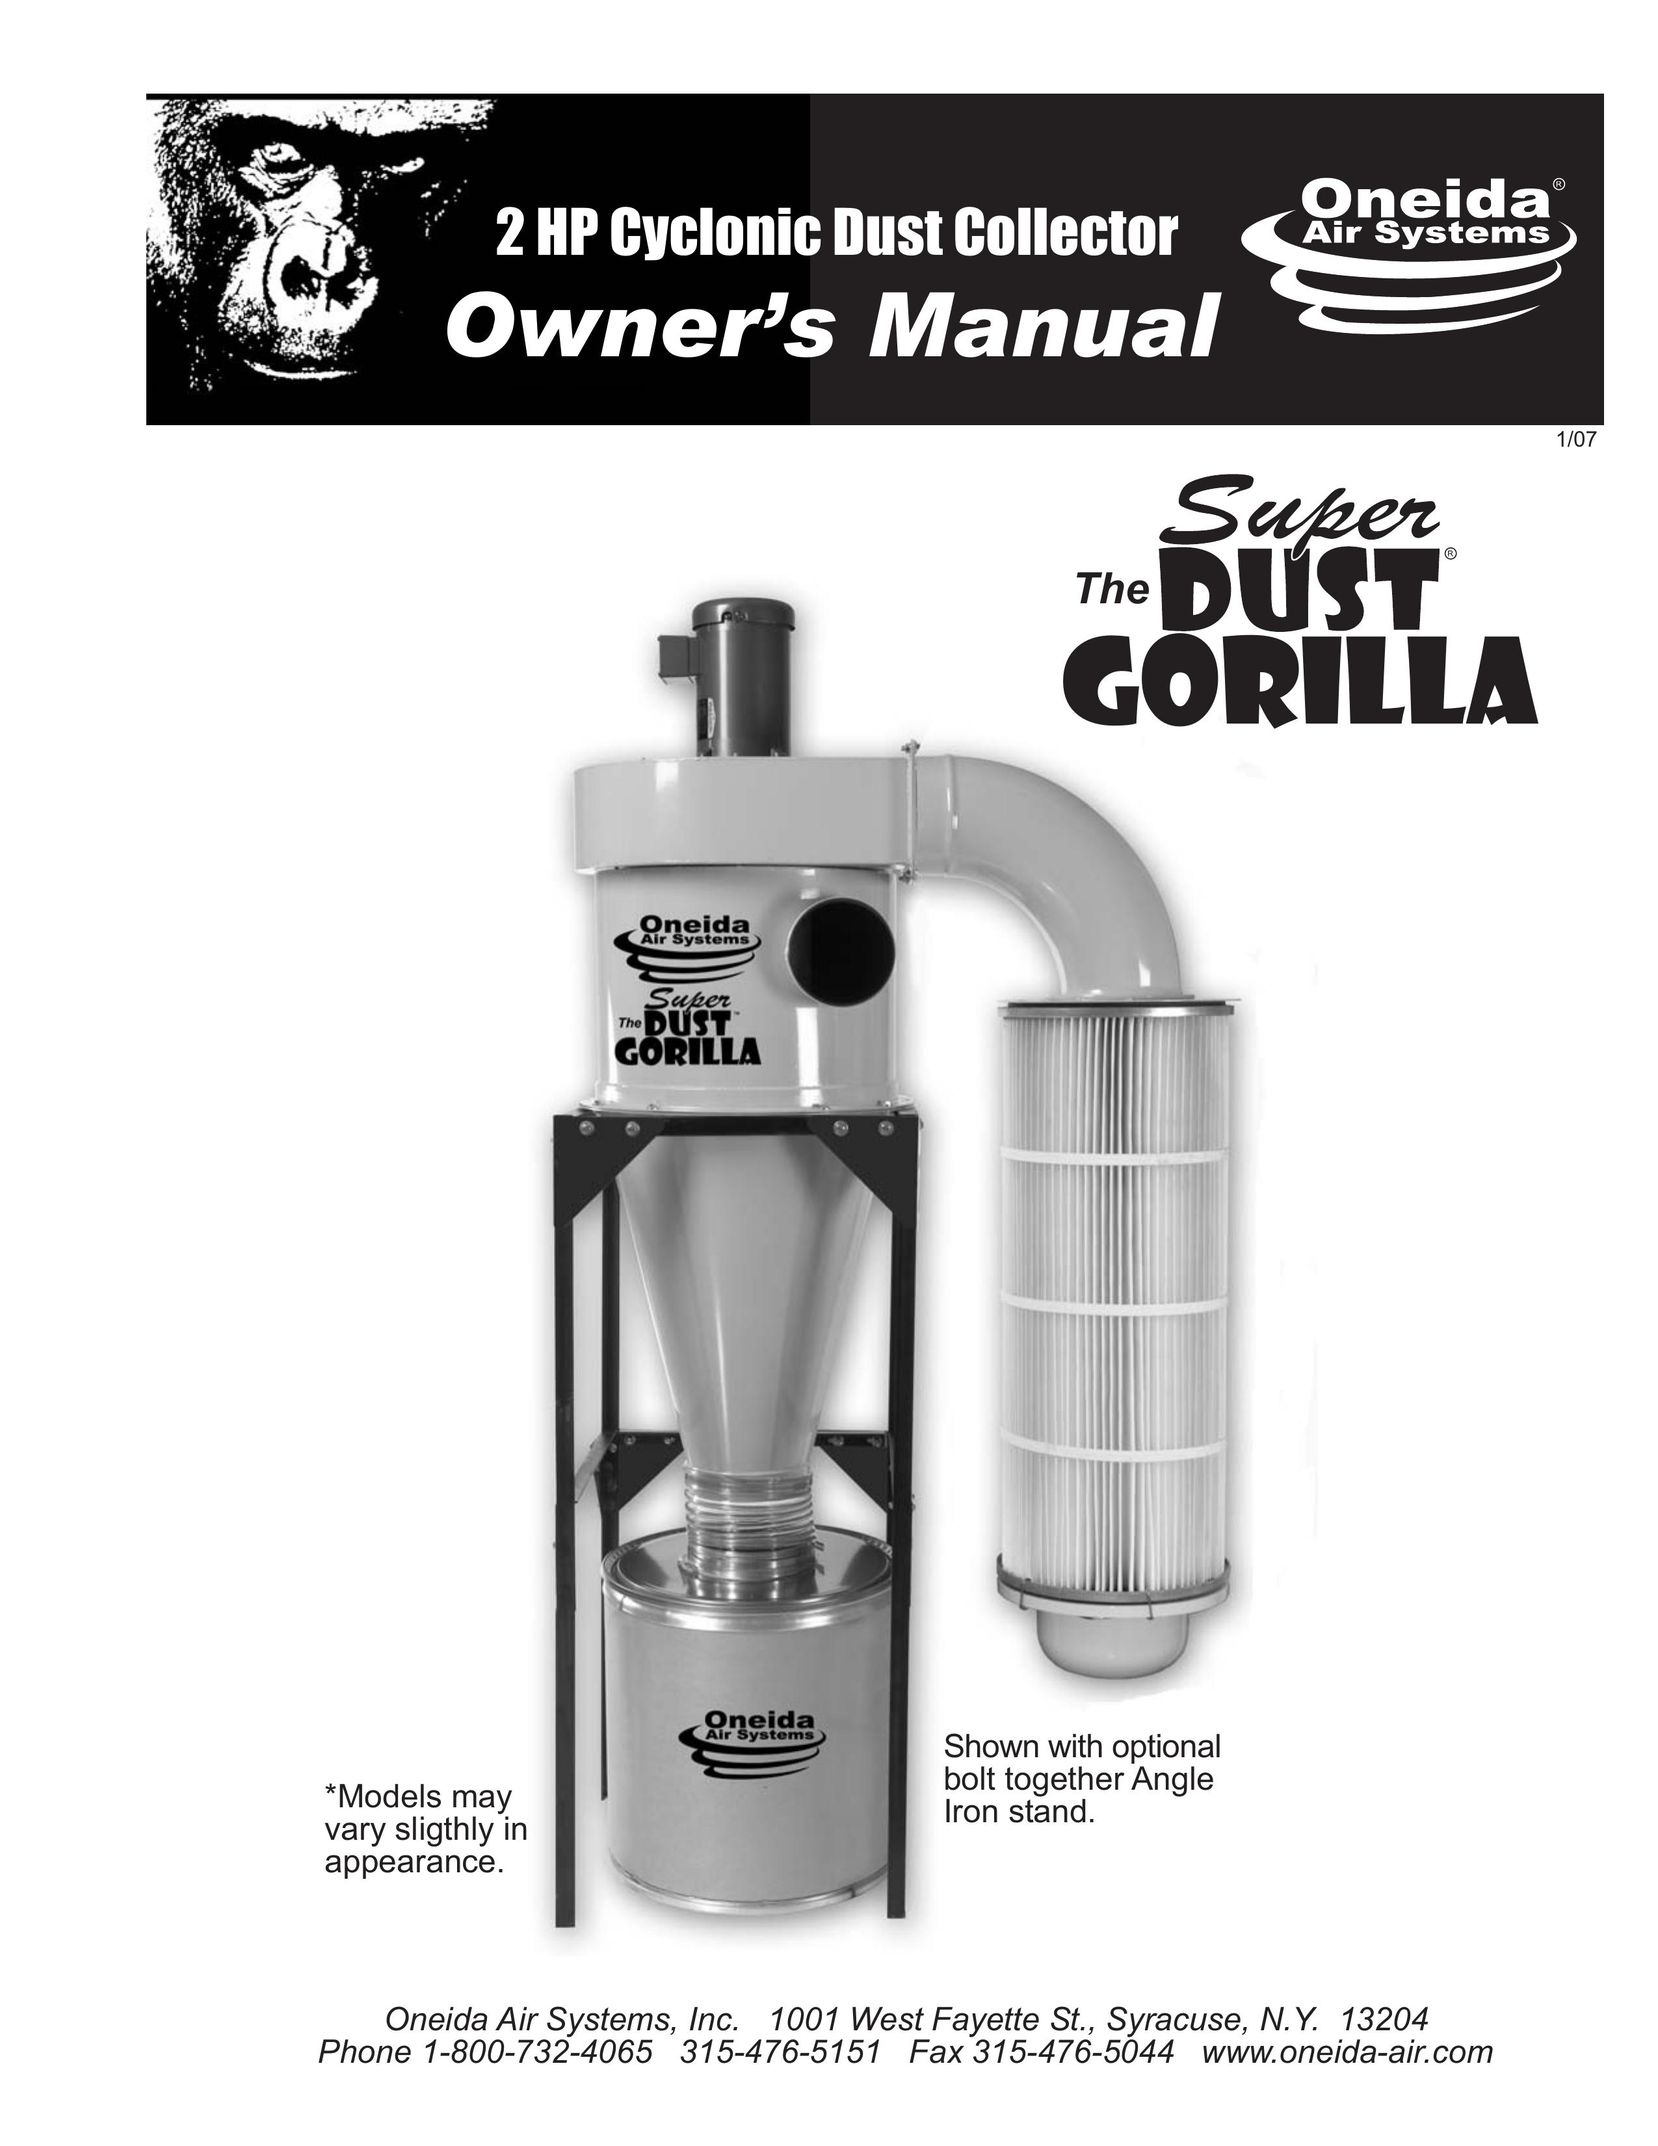 Oneida Air Systems Super Dust Gorilla Dust Collector User Manual